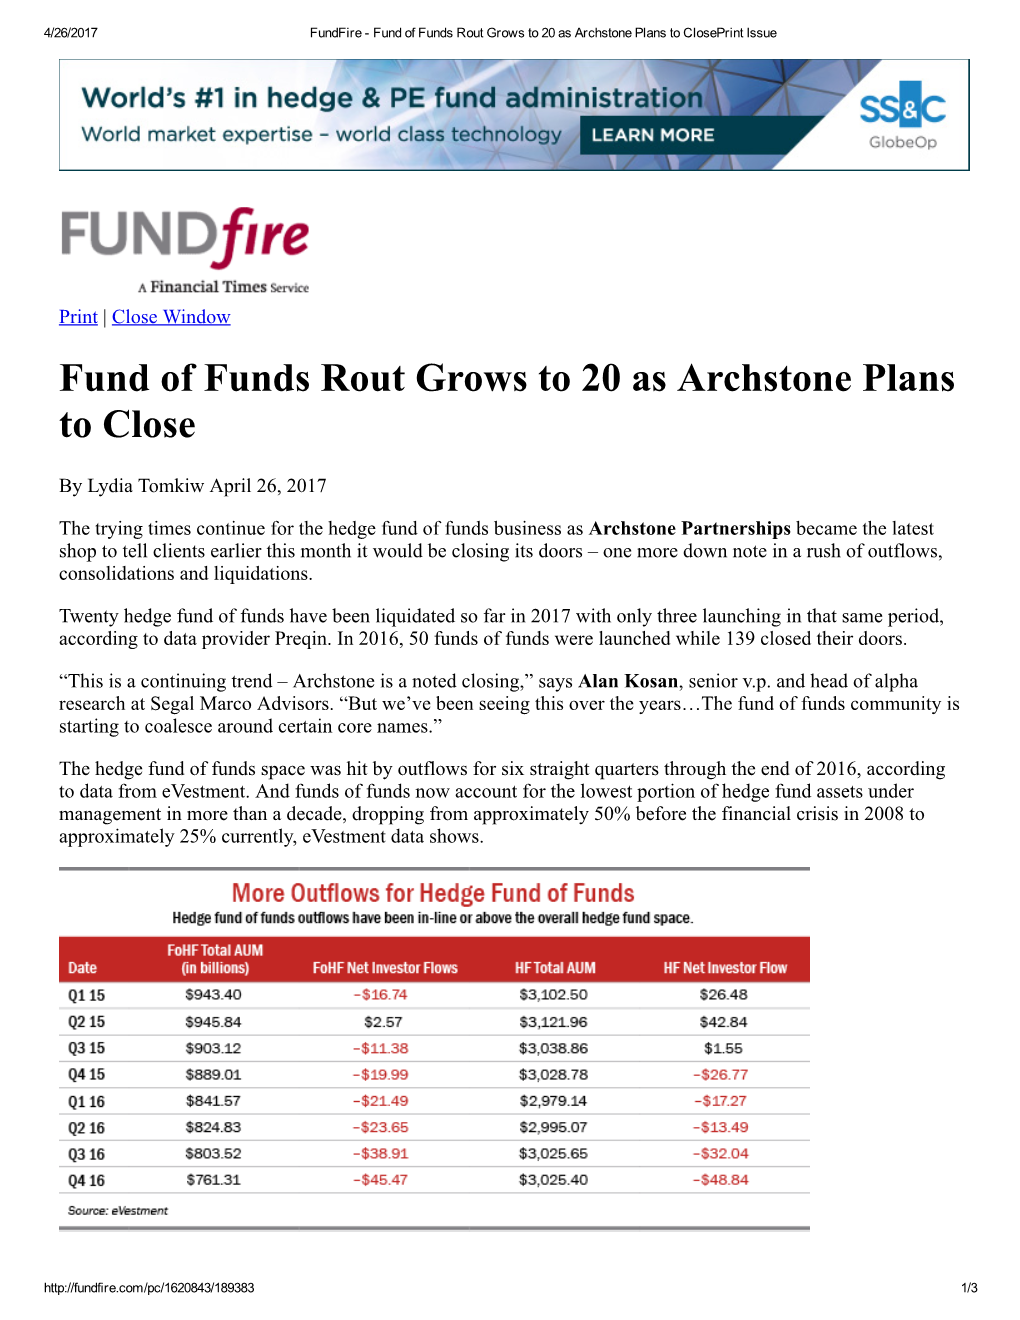 Fund of Funds Rout Grows to 20 As Archstone Plans to Closeprint Issue